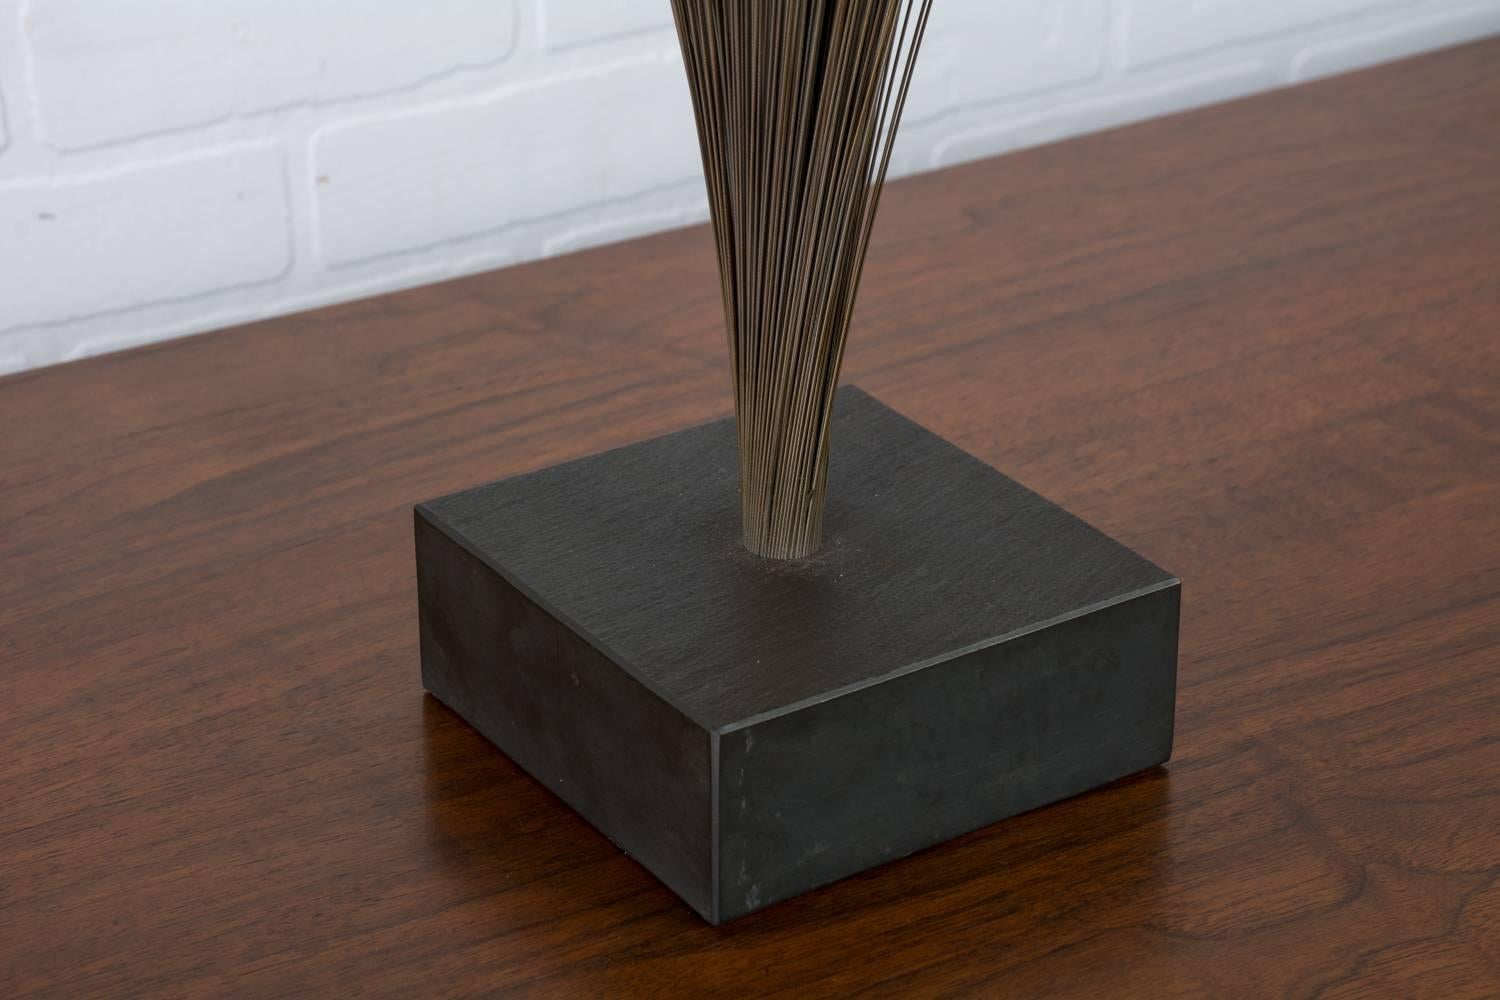 This vintage midcentury sculpture is in the style of Harry Bertoia's spray sculpture. It features a slate base and metal rods with a bronze finish that 'spray' out from the base.